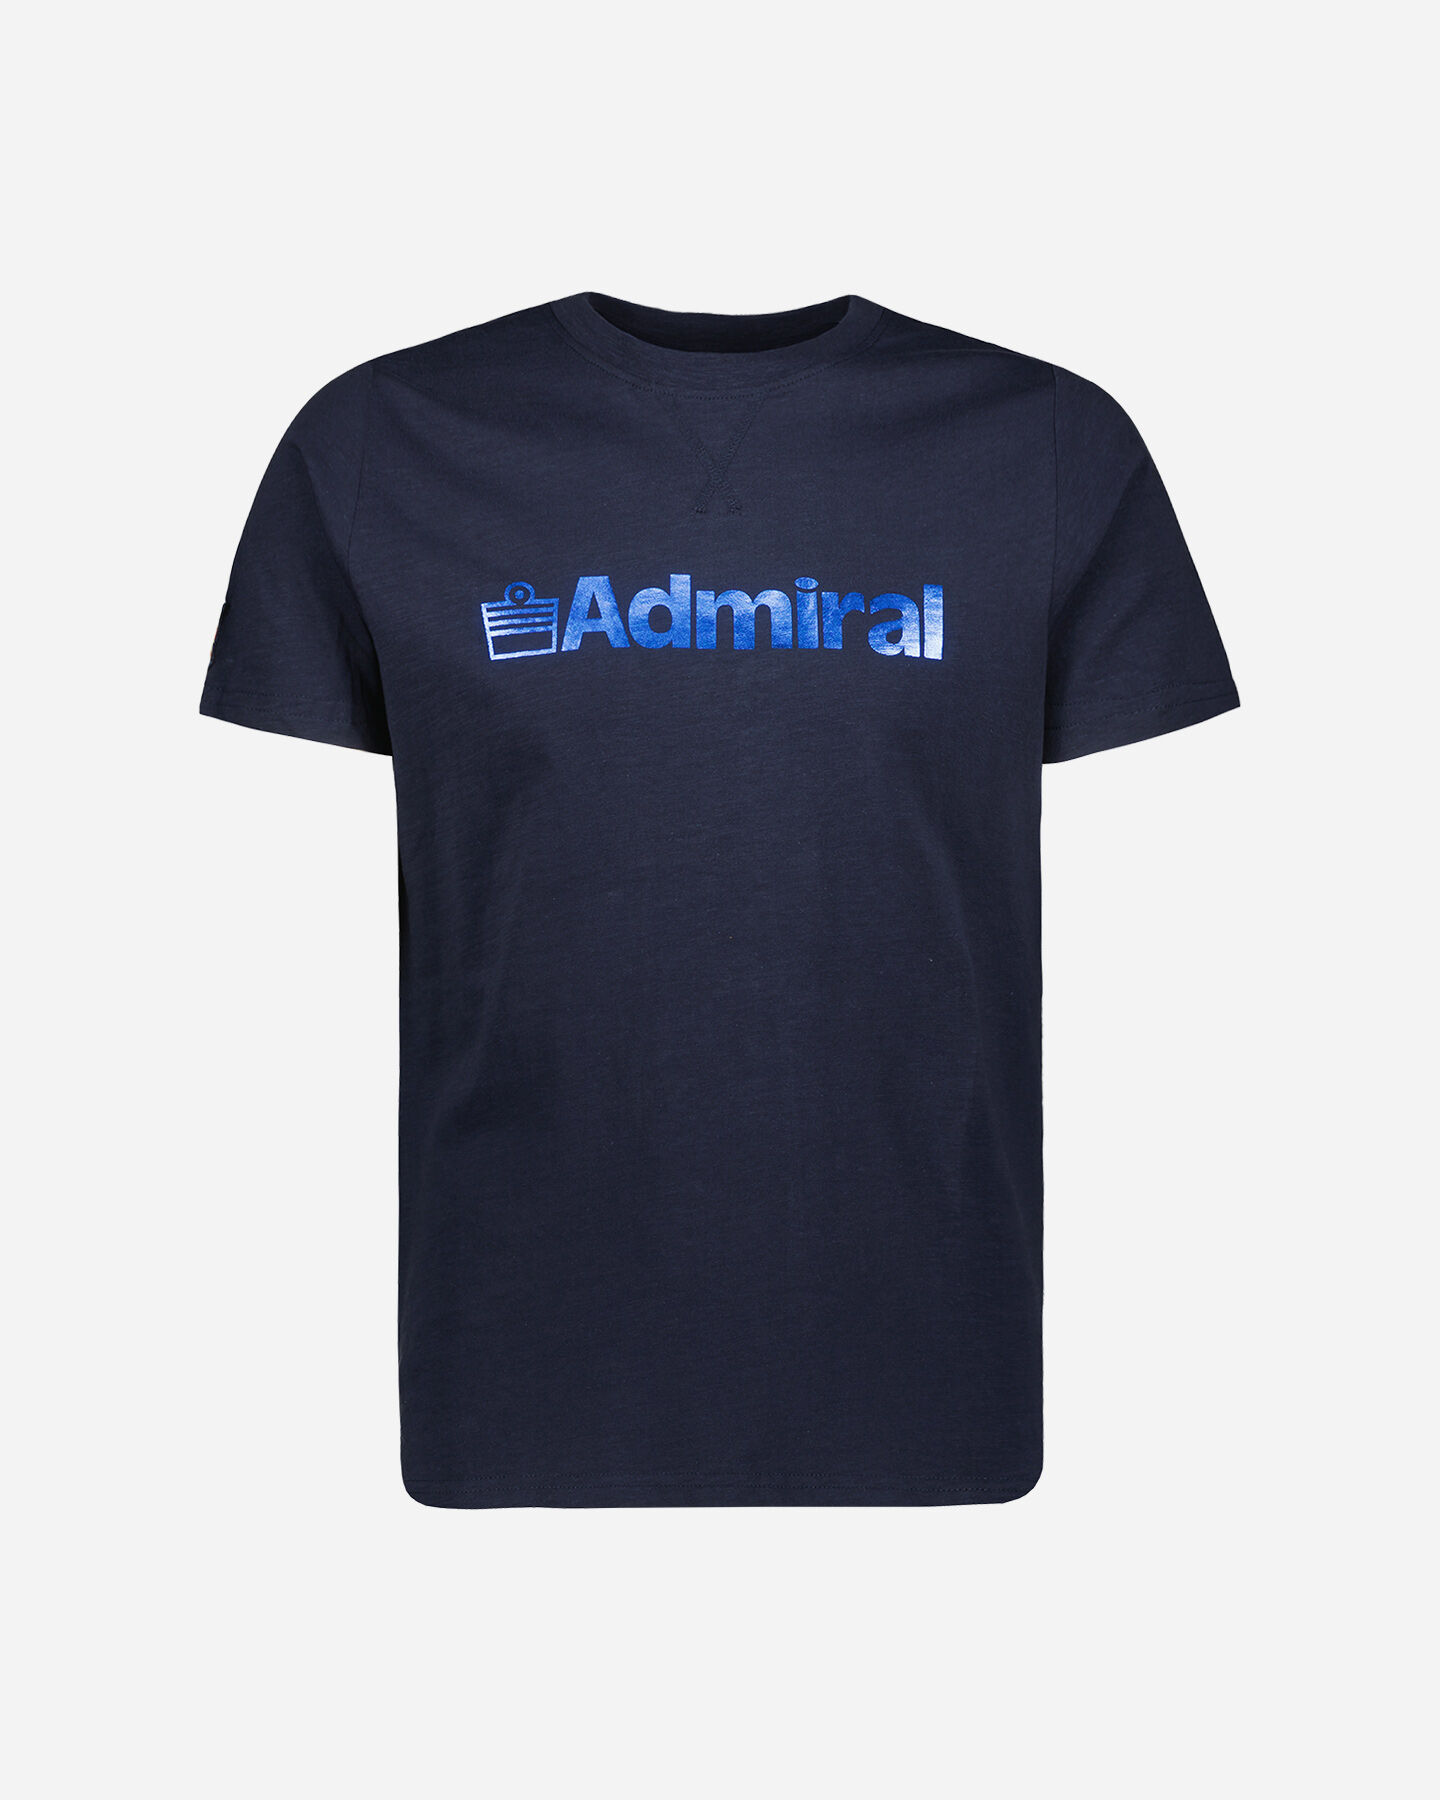  T-Shirt ADMIRAL PRINTED M S4136511|EI003|S scatto 0